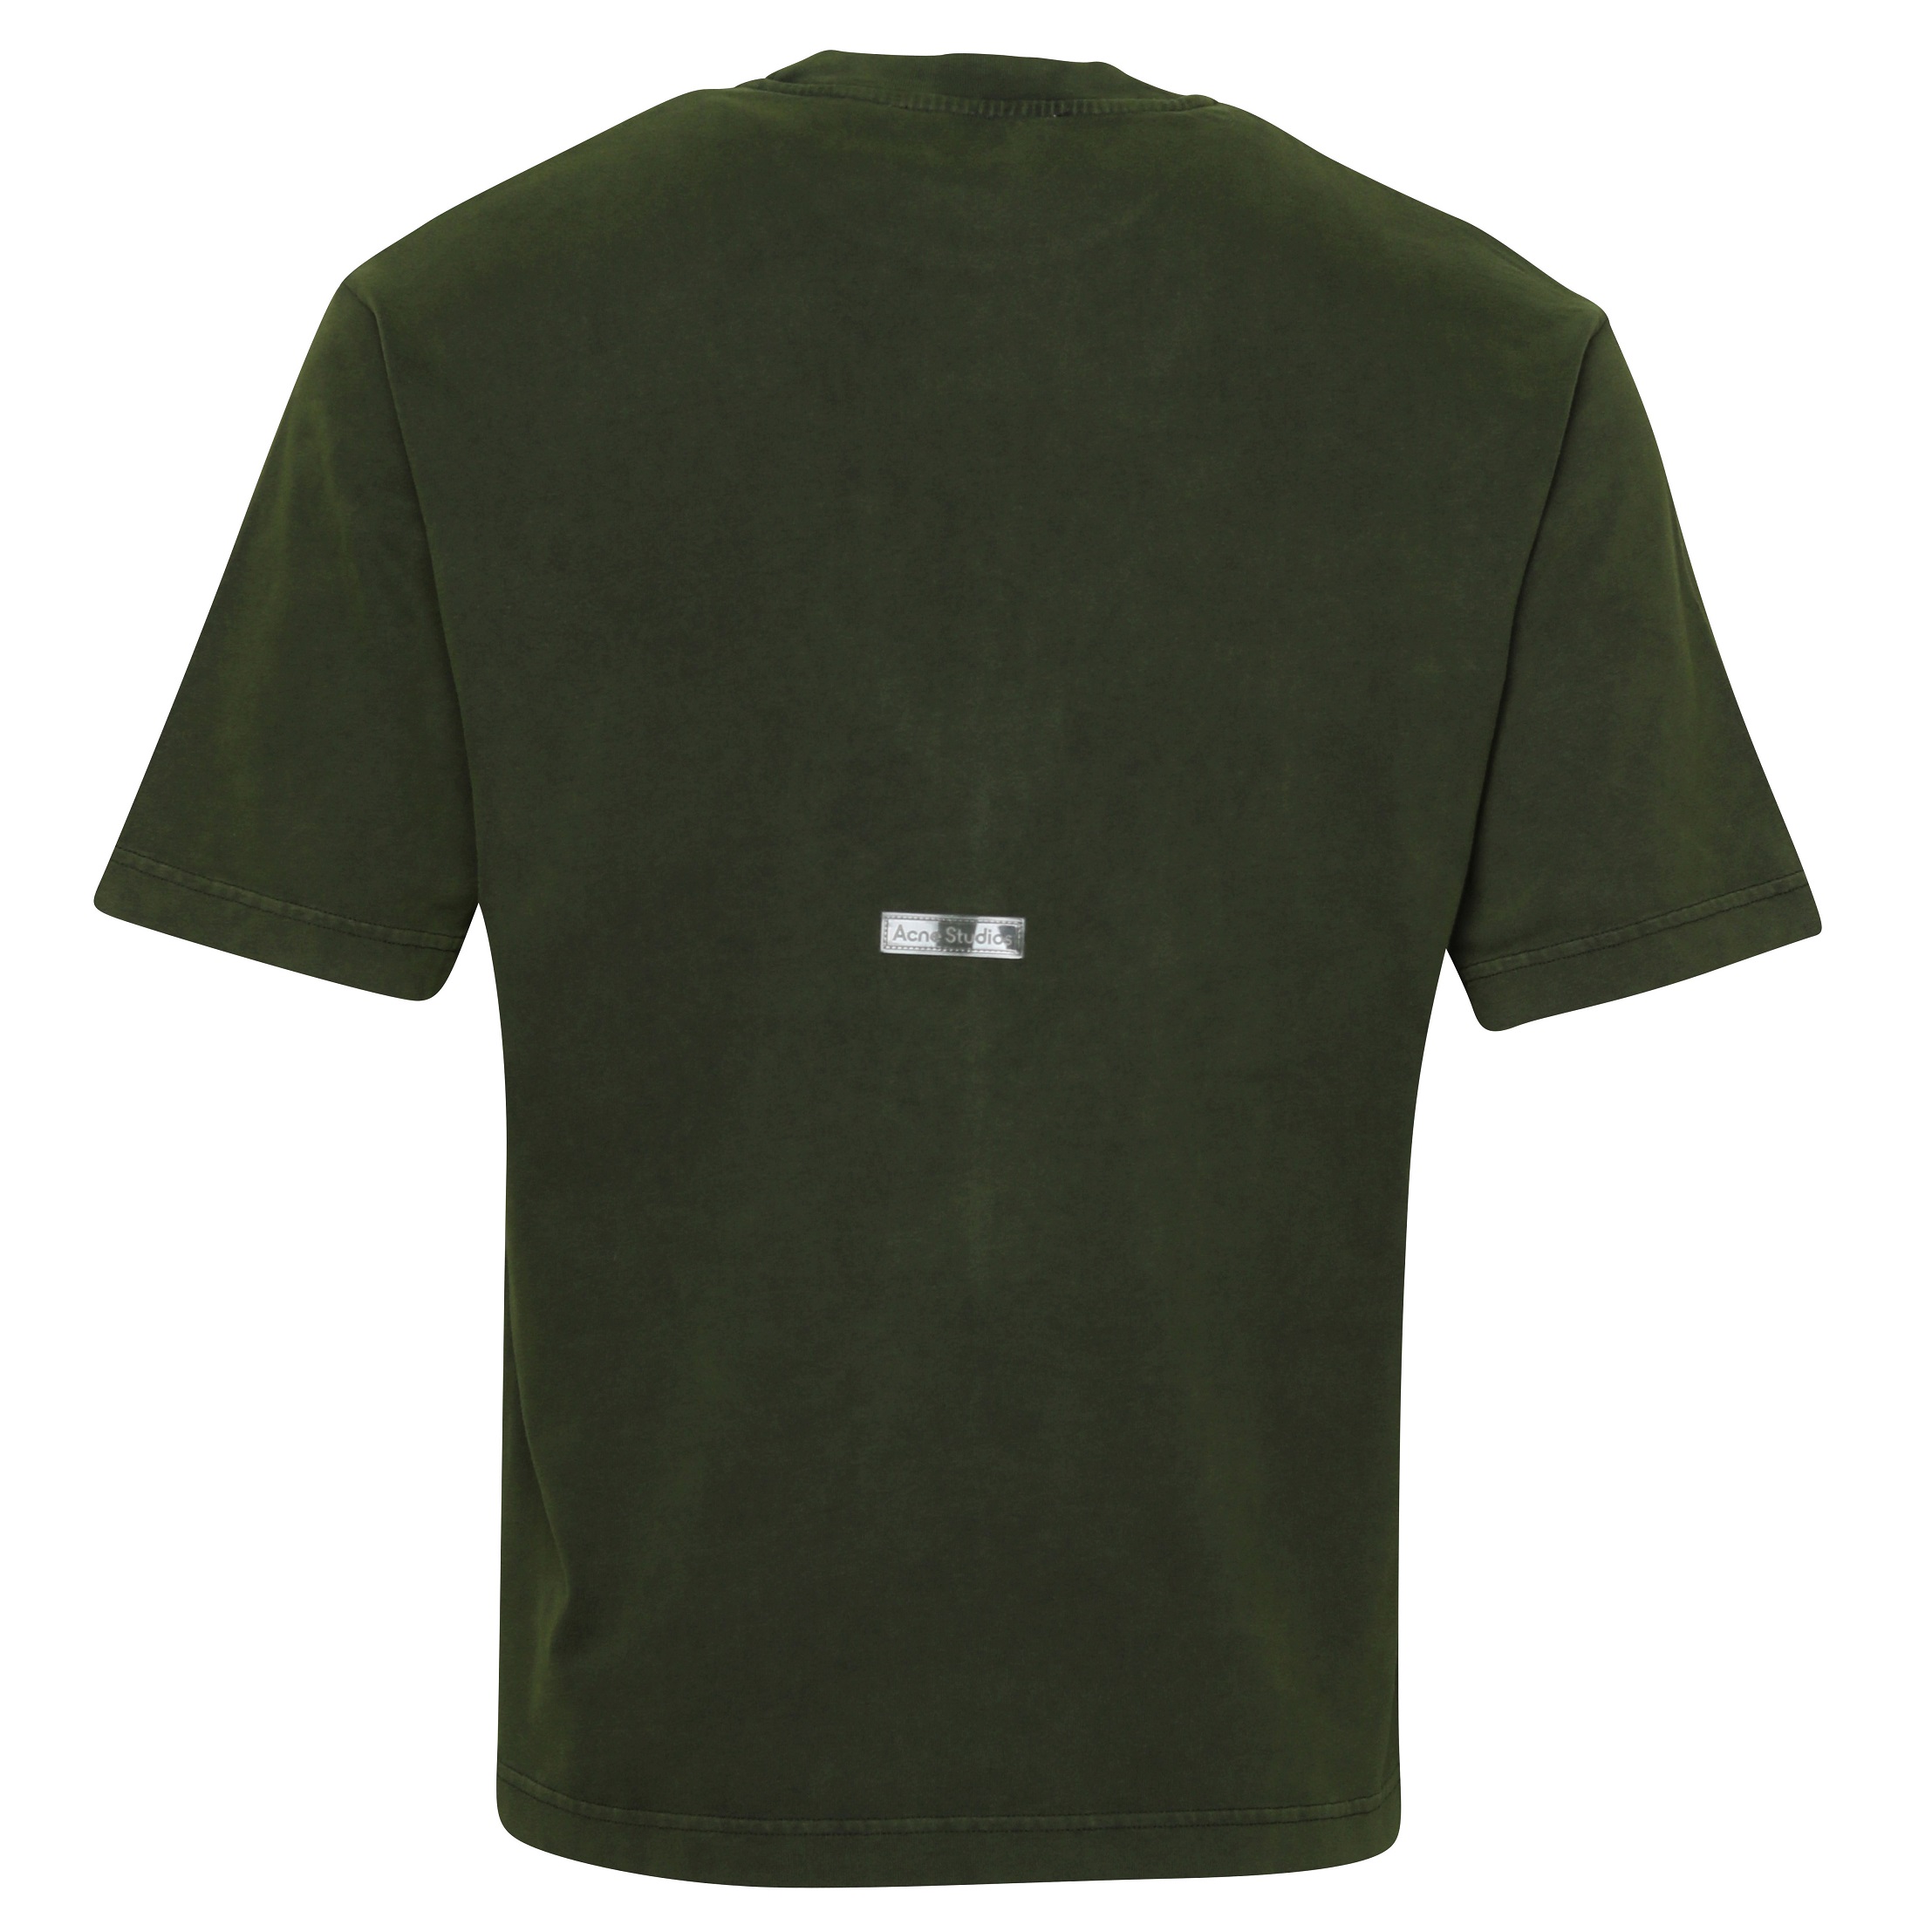 Acne Studios Vintage T-Shirt in Moss Green